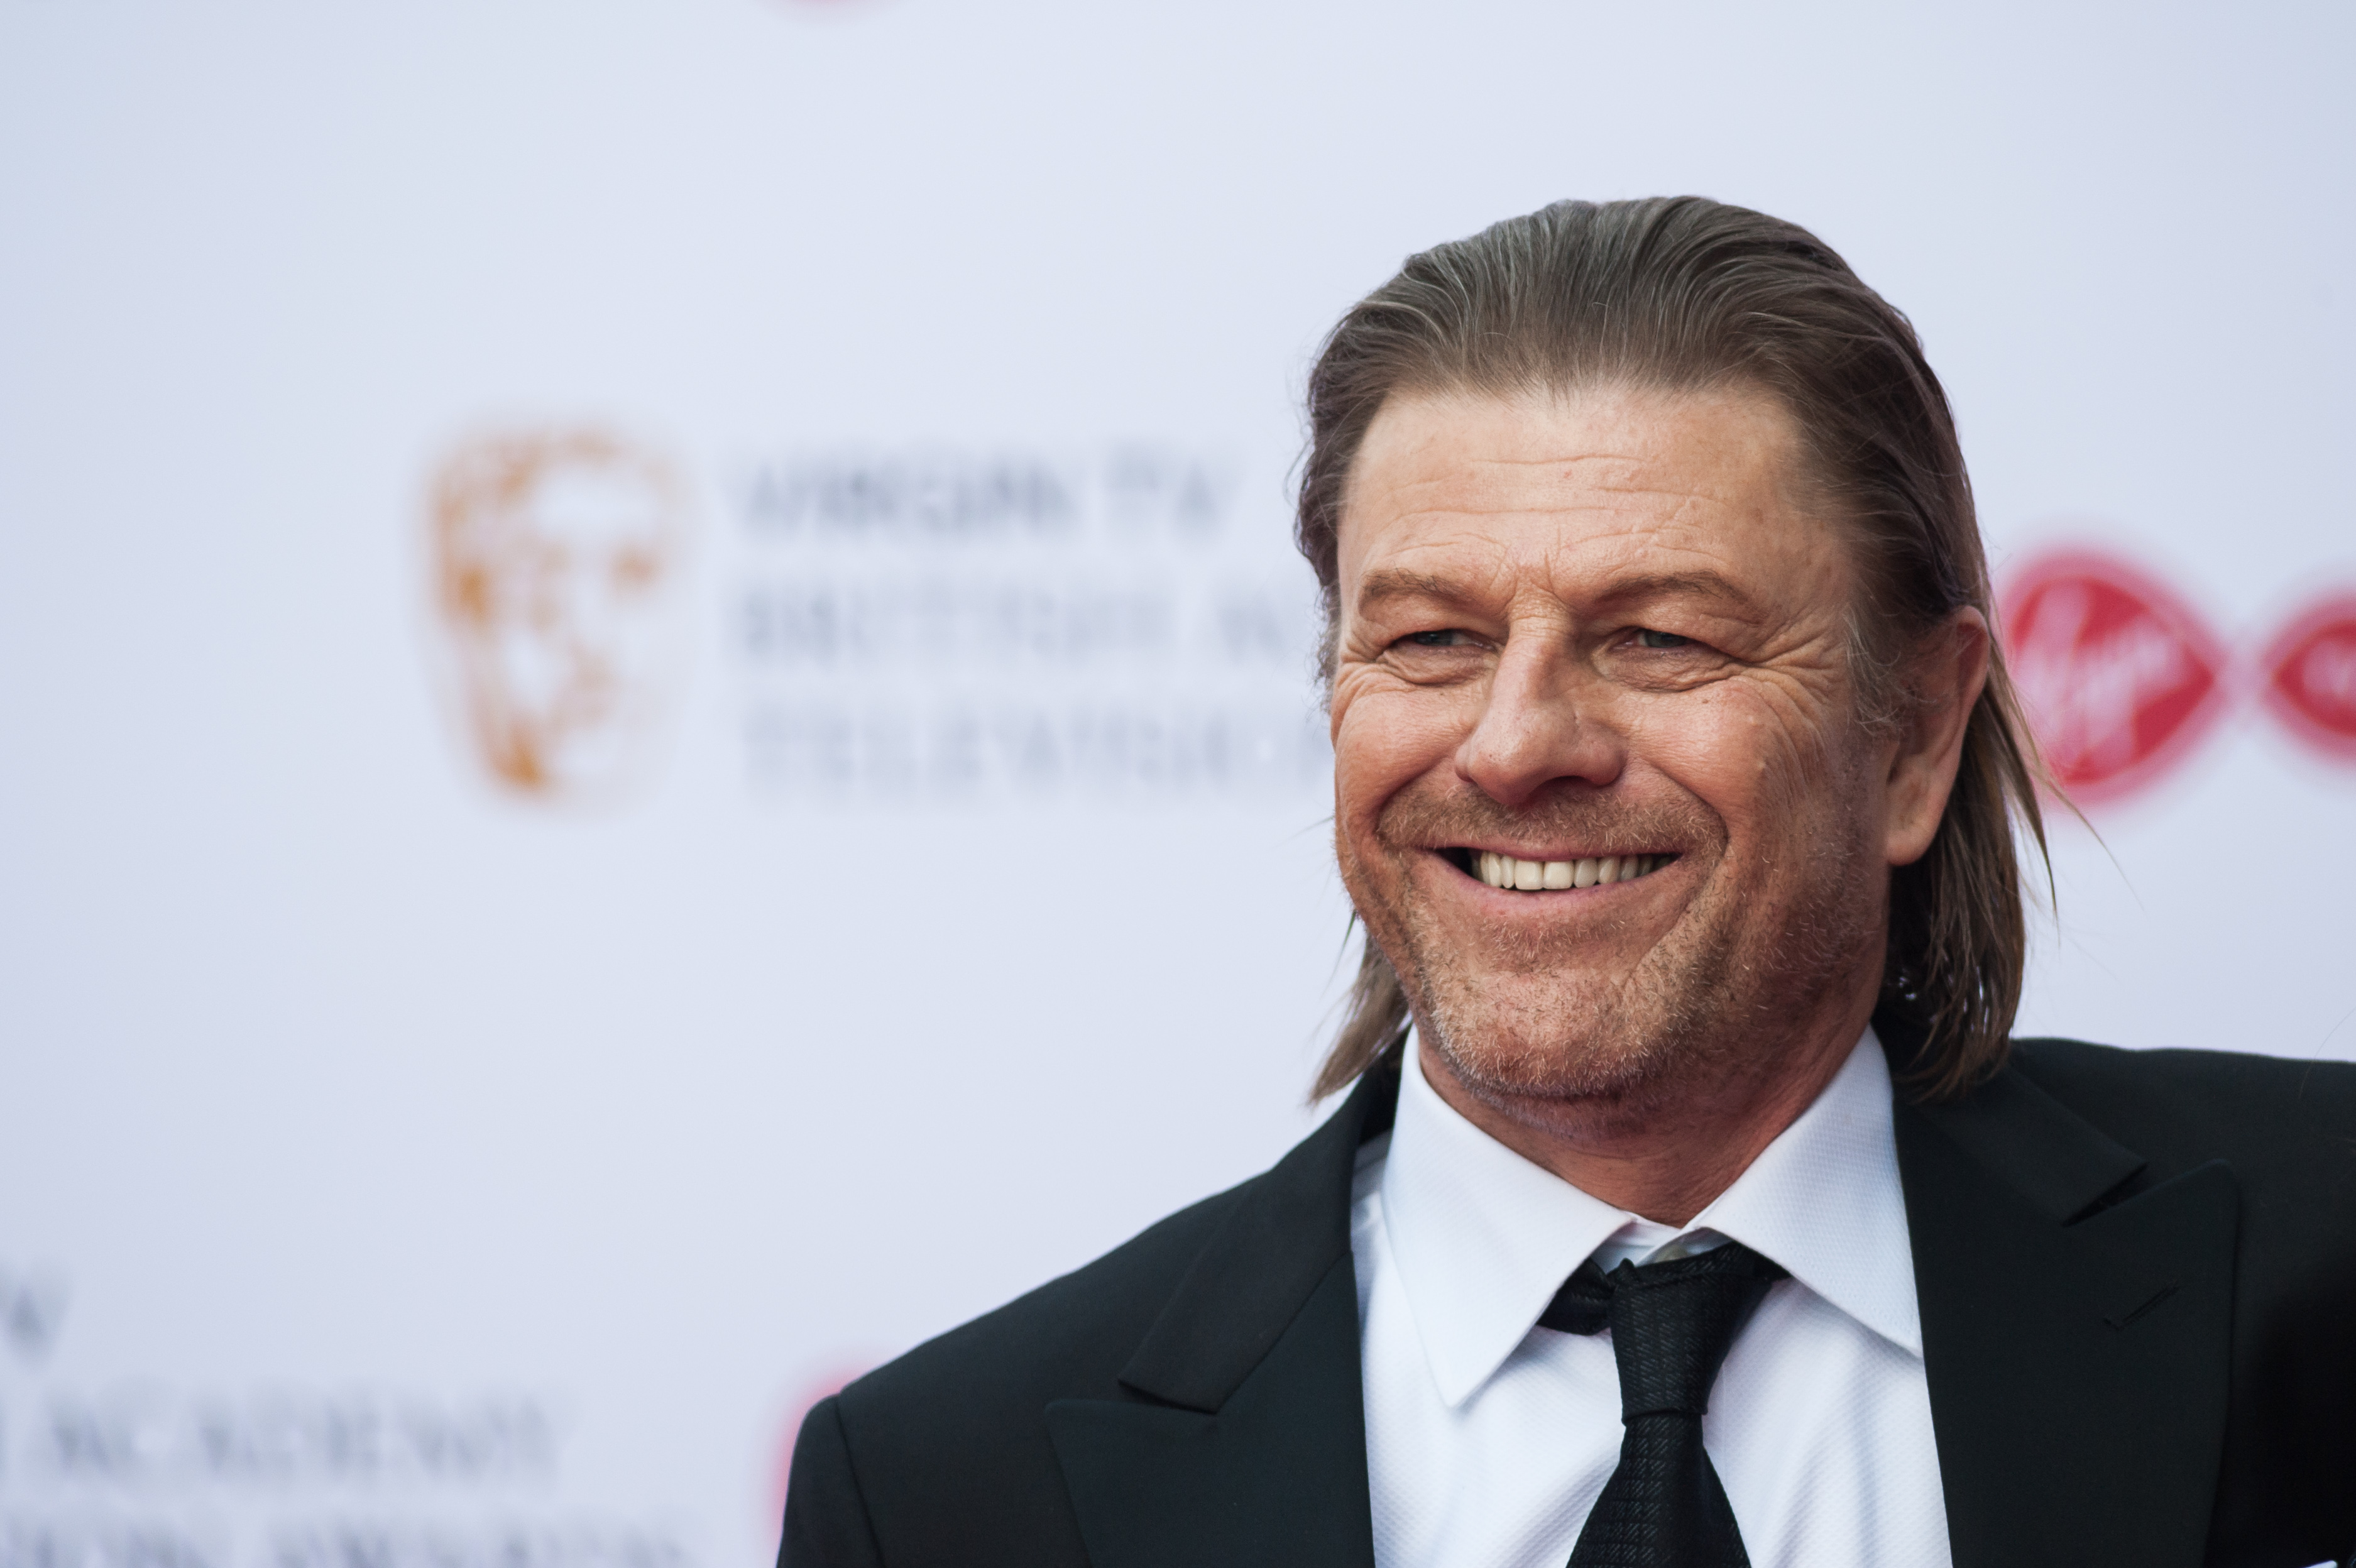 Sean Bean attends the Virgin TV British Academy Television Awards ceremony at the Royal Festival Hall on May 14, 2017 in London, United Kingdom. (Wiktor Szymanowic&mdash;Barcroft Media/Getty Images)